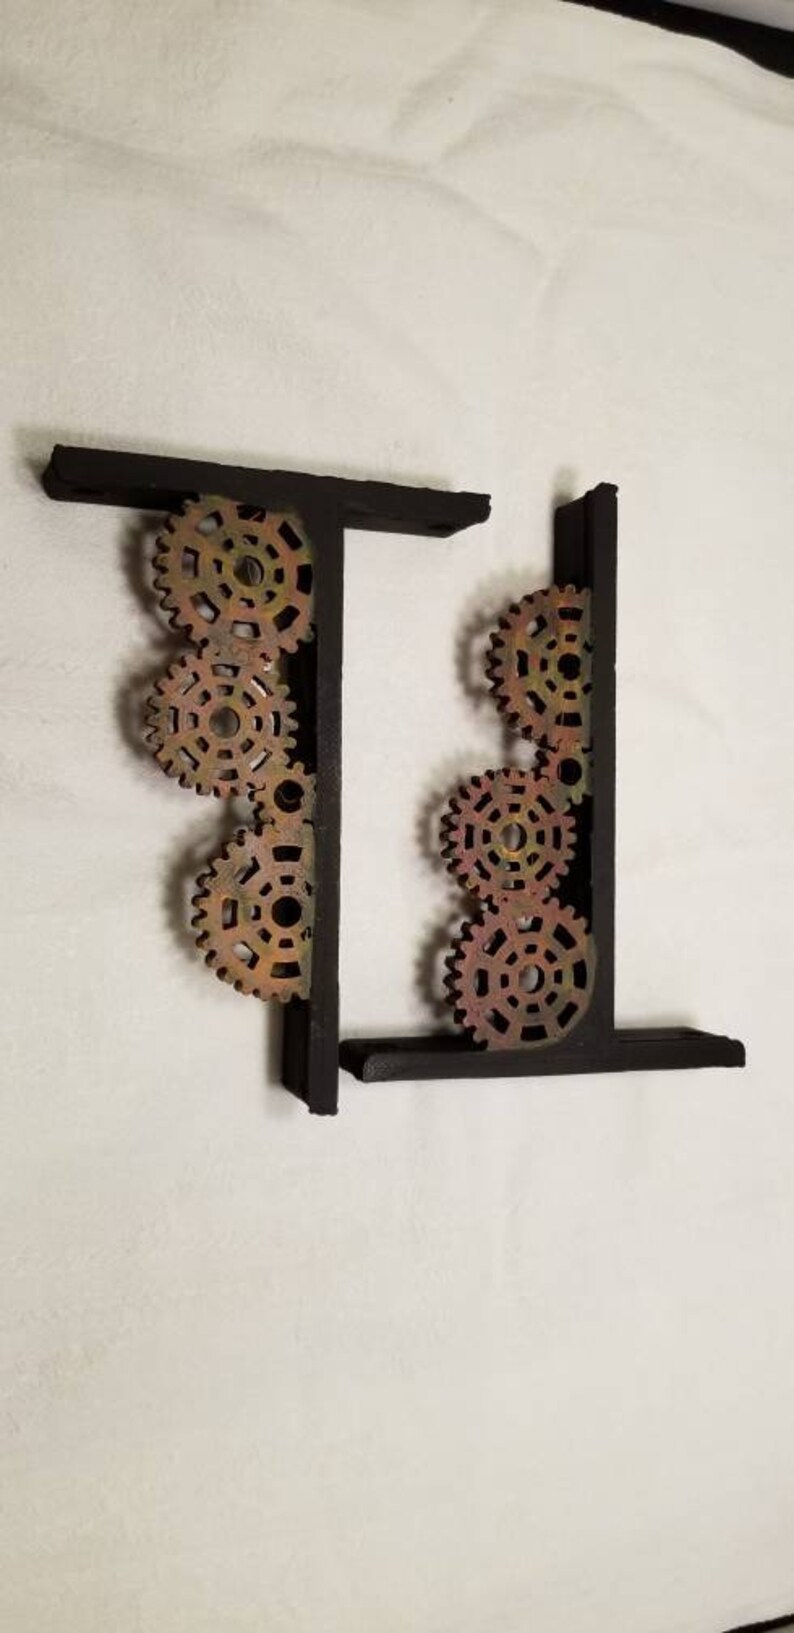 Steampunk Gear shelf bracket industrial old vintage rusty rusted decor old pipe shelving image 2